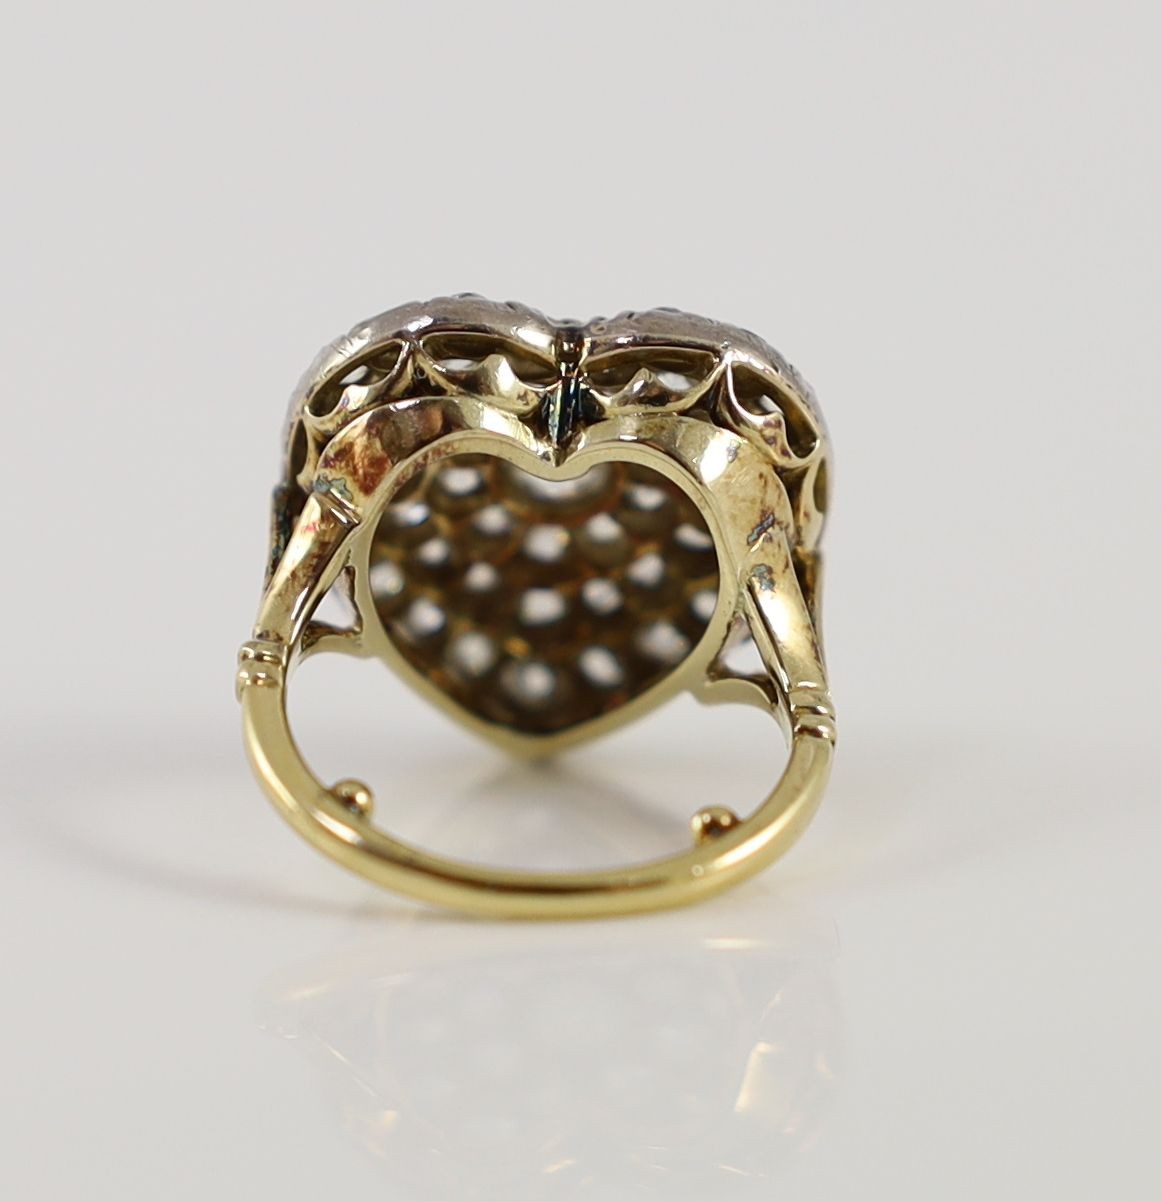 PROPERTY FROM THE COLLECTION OF HER ROYAL HIGHNESS THE PRINCESS MARGARET COUNTESS OF SNOWDON: An antique gold, silver and pave set diamond heart shaped dress ring